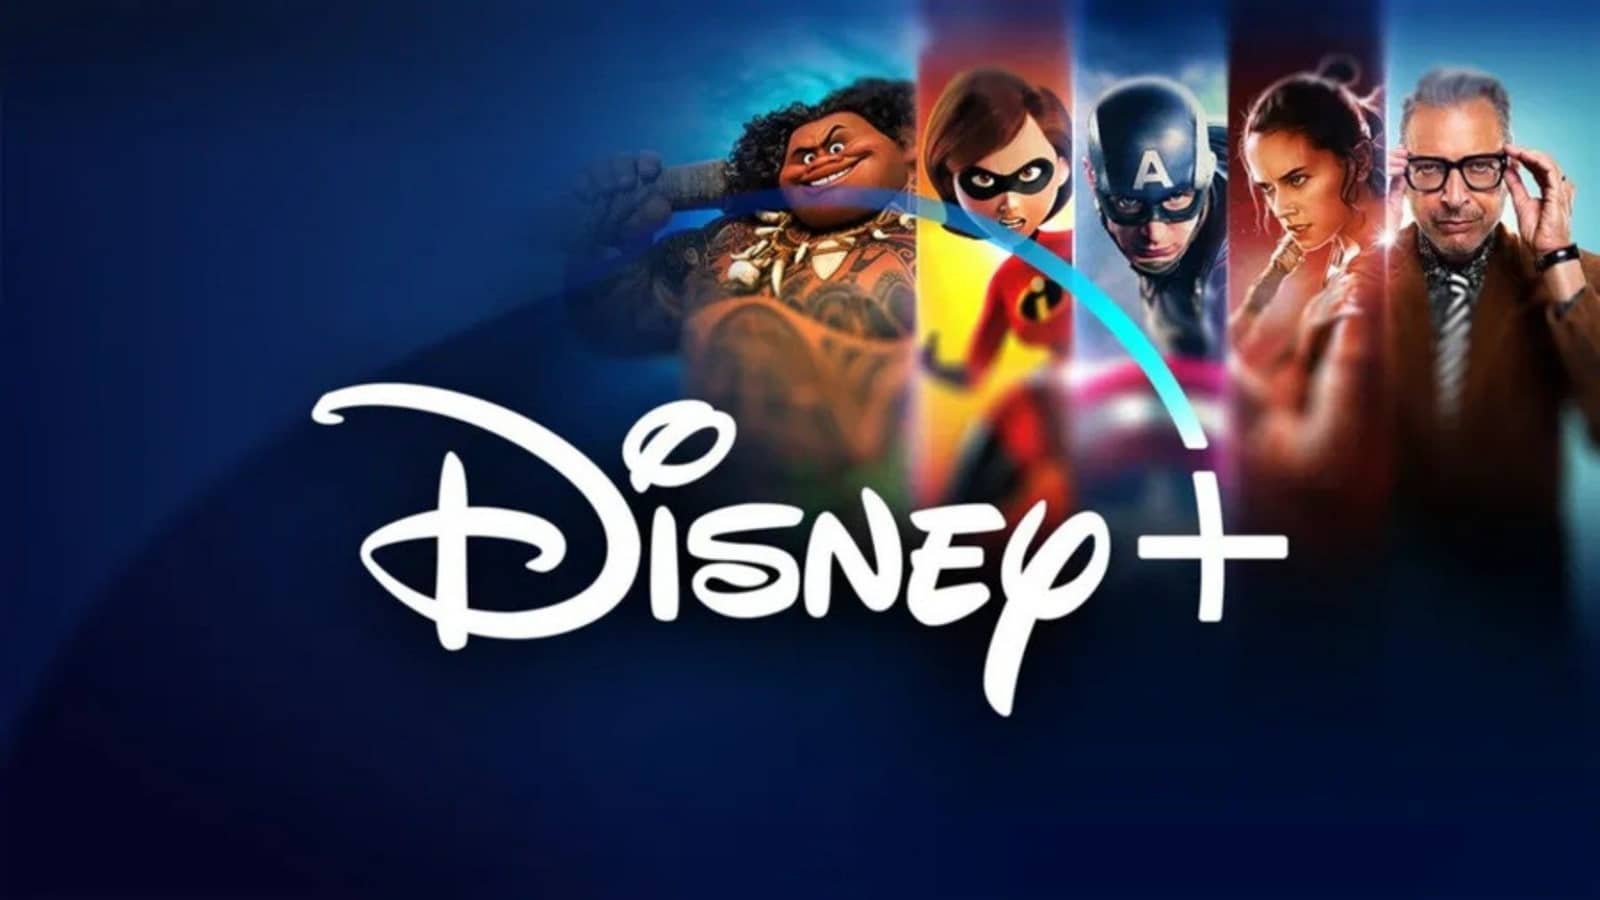 PS5 may finally get native Disney Plus app to enable 4K streaming Dexerto